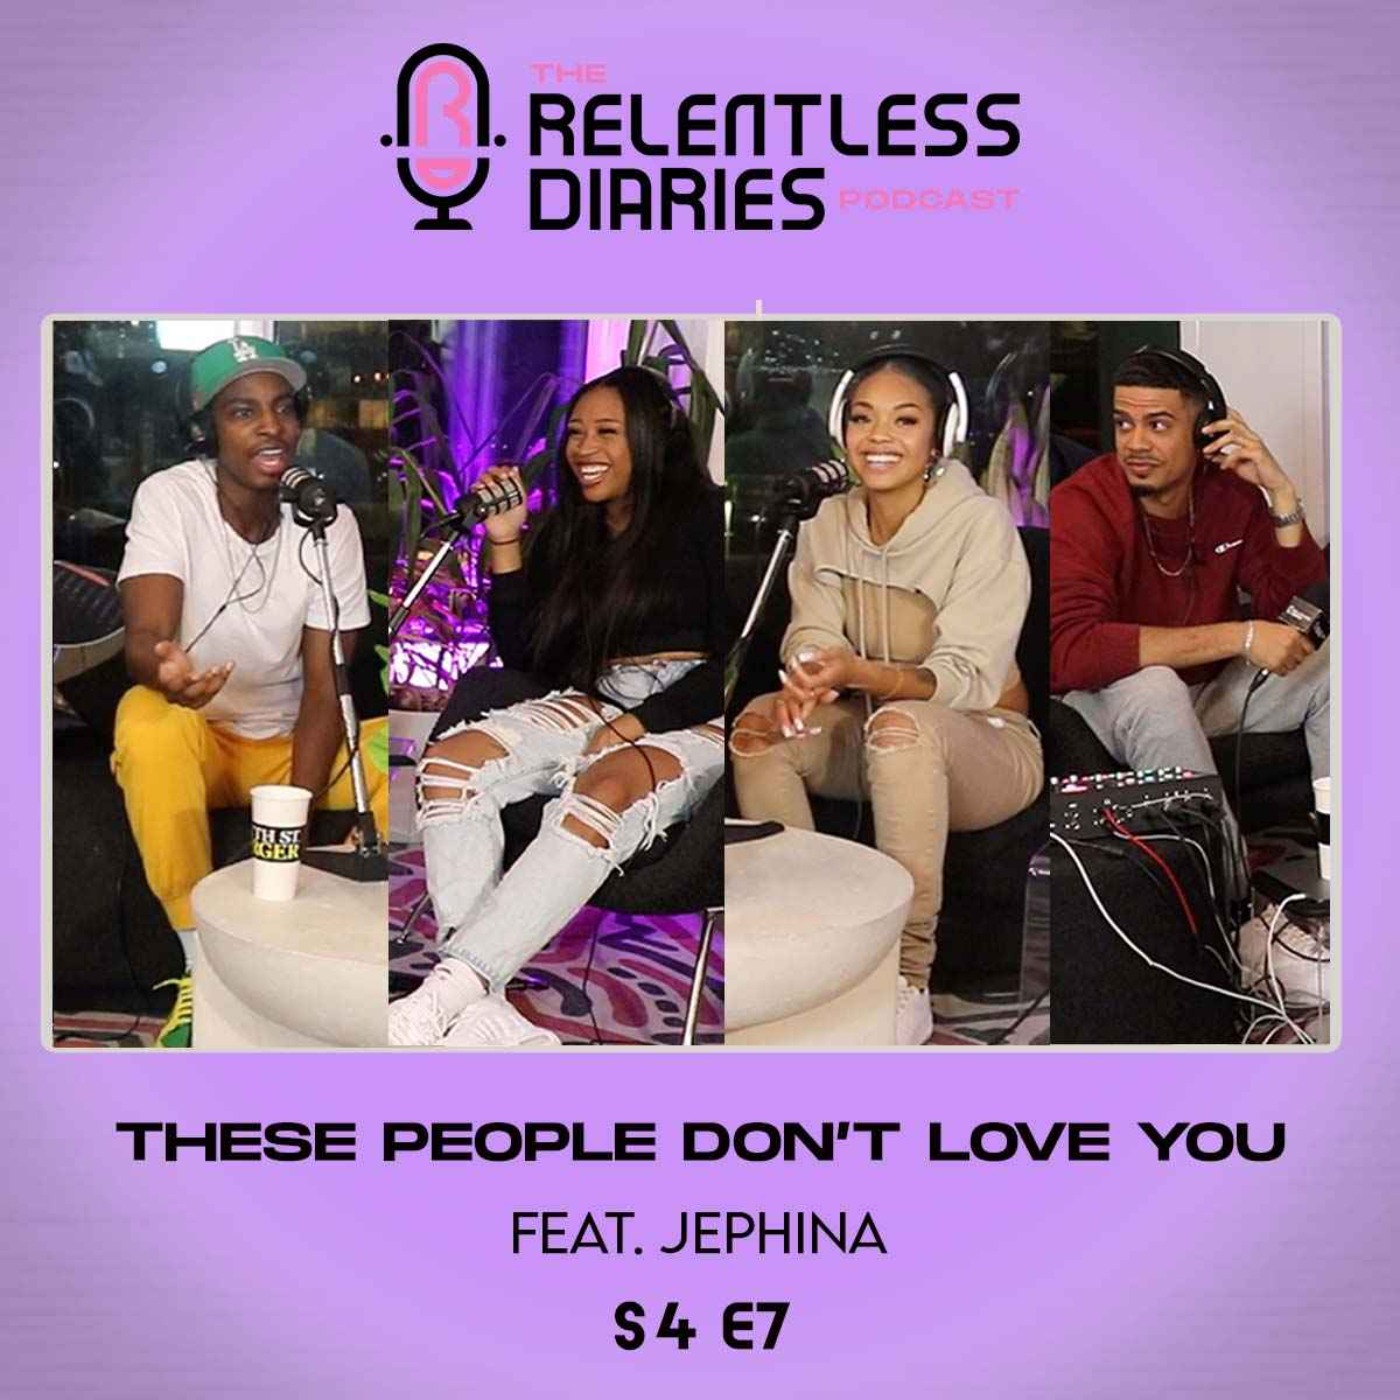 These People Don’t Love You Feat. Jephina